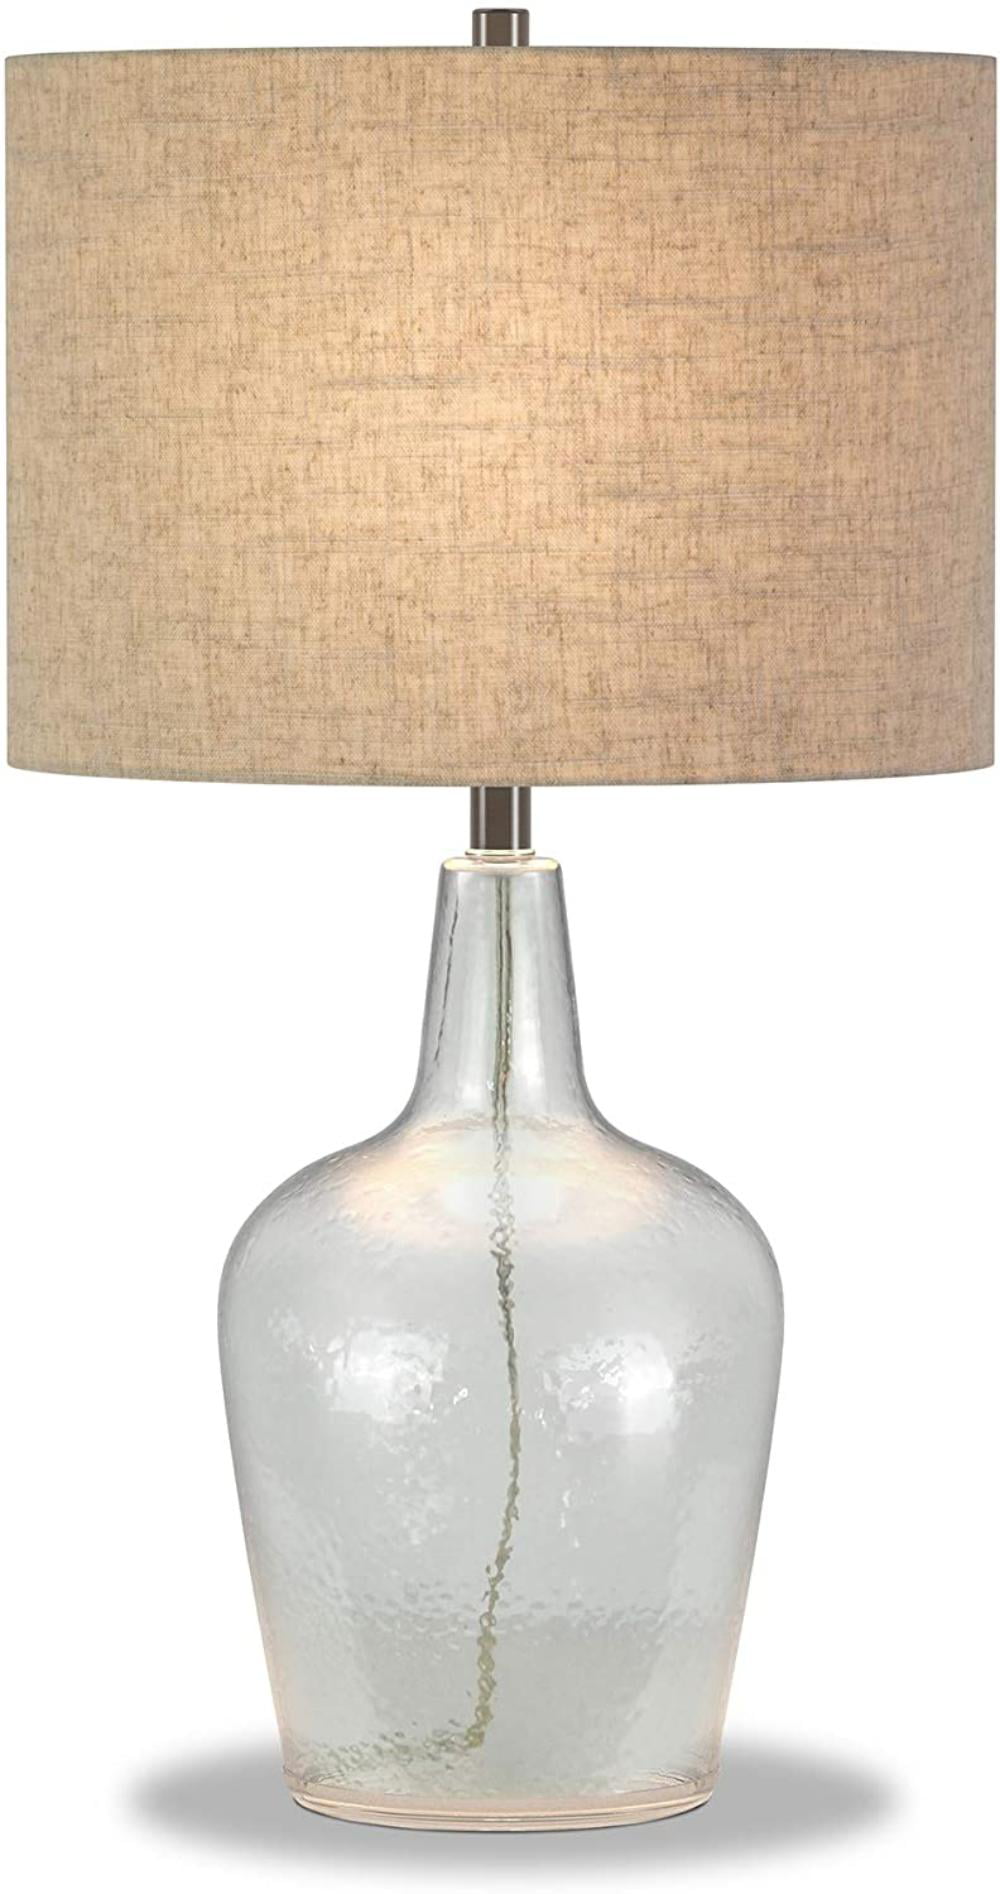 Henn&Hart Traditional Clear Glass Table Lamp with Fabric Shade in Blackened Bronze